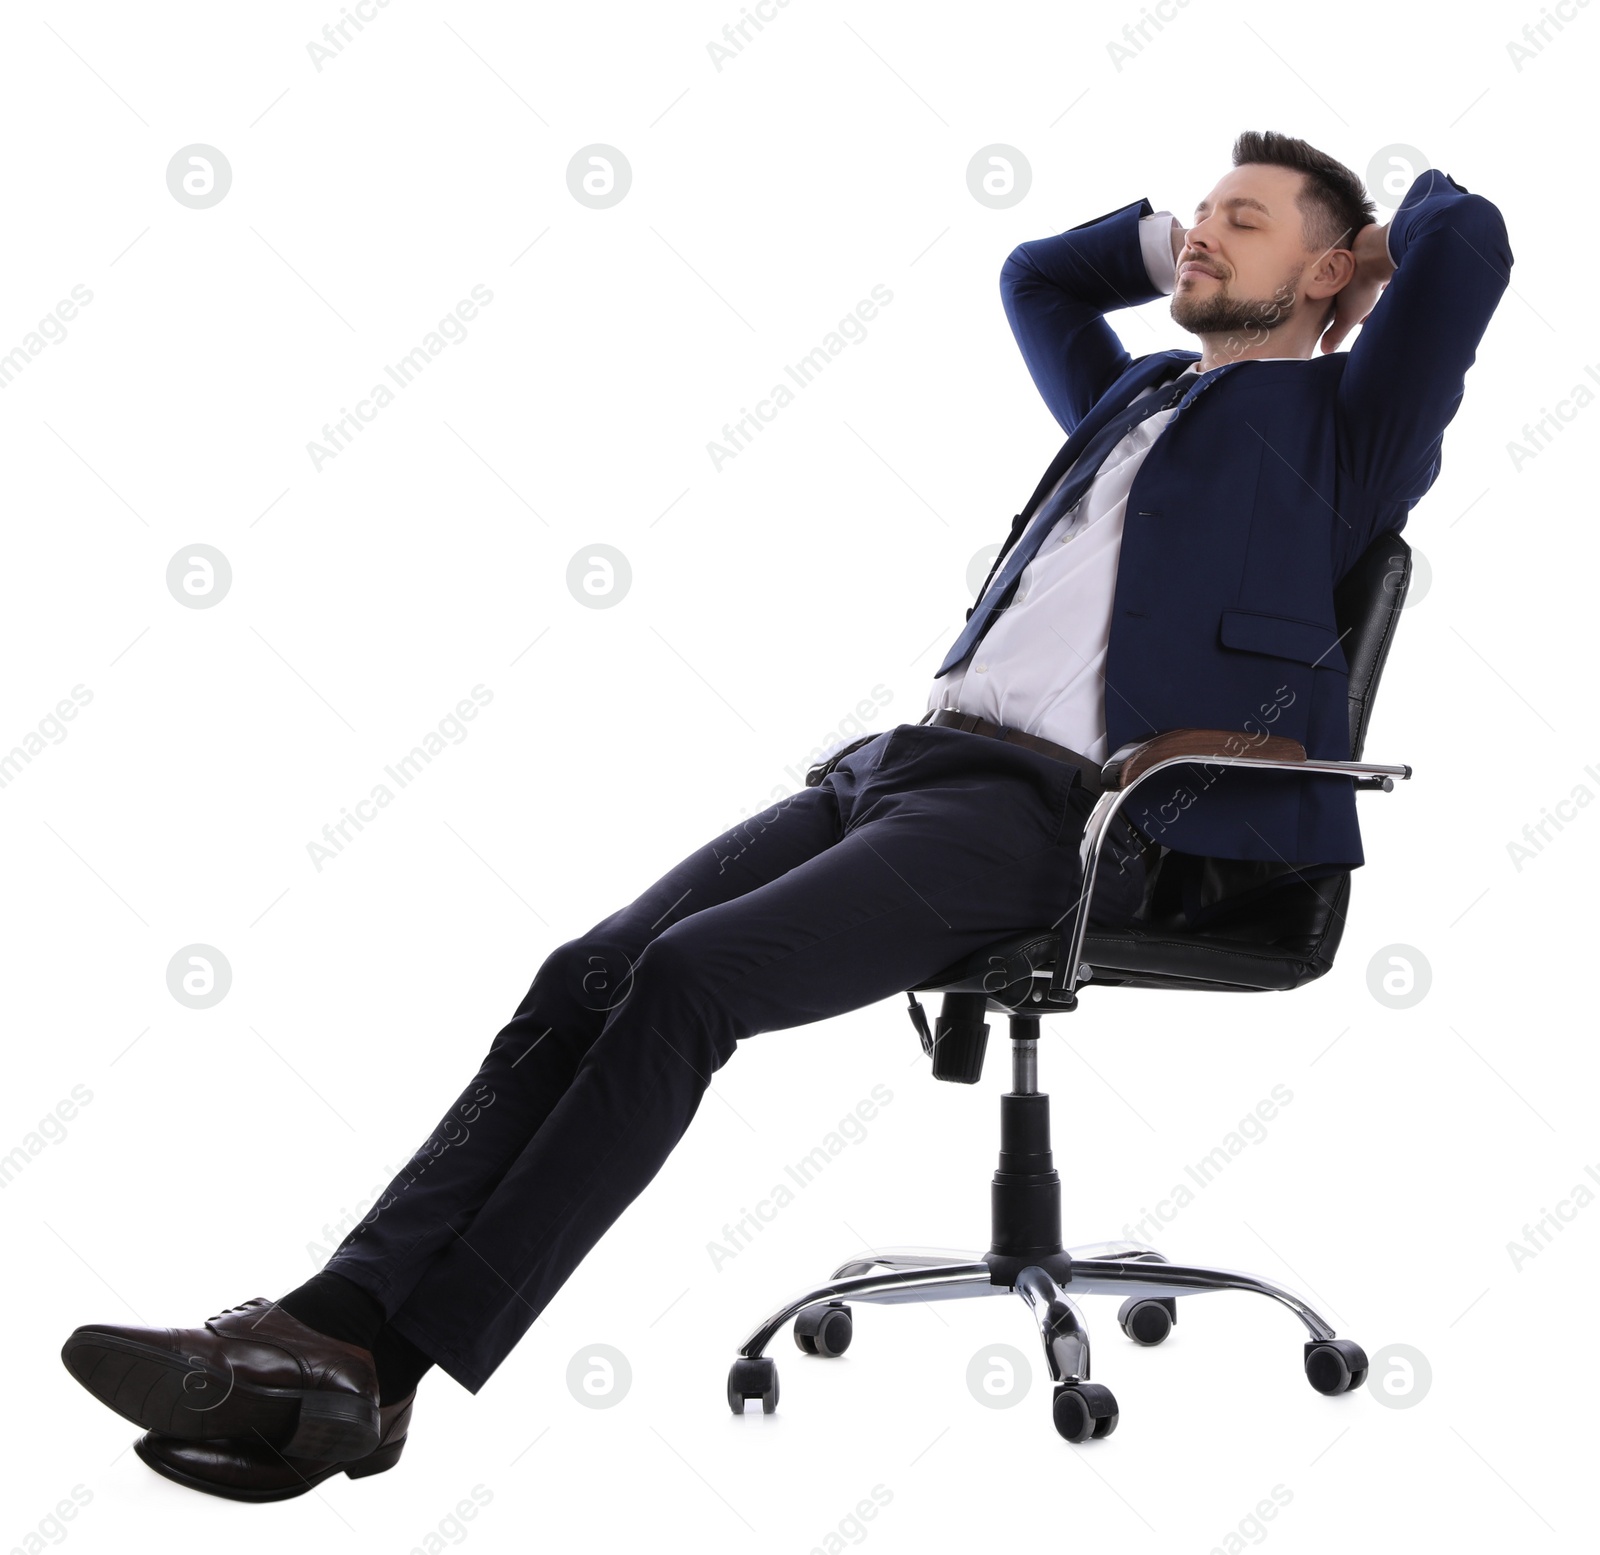 Photo of Handsome businessman relaxing in office chair on white background